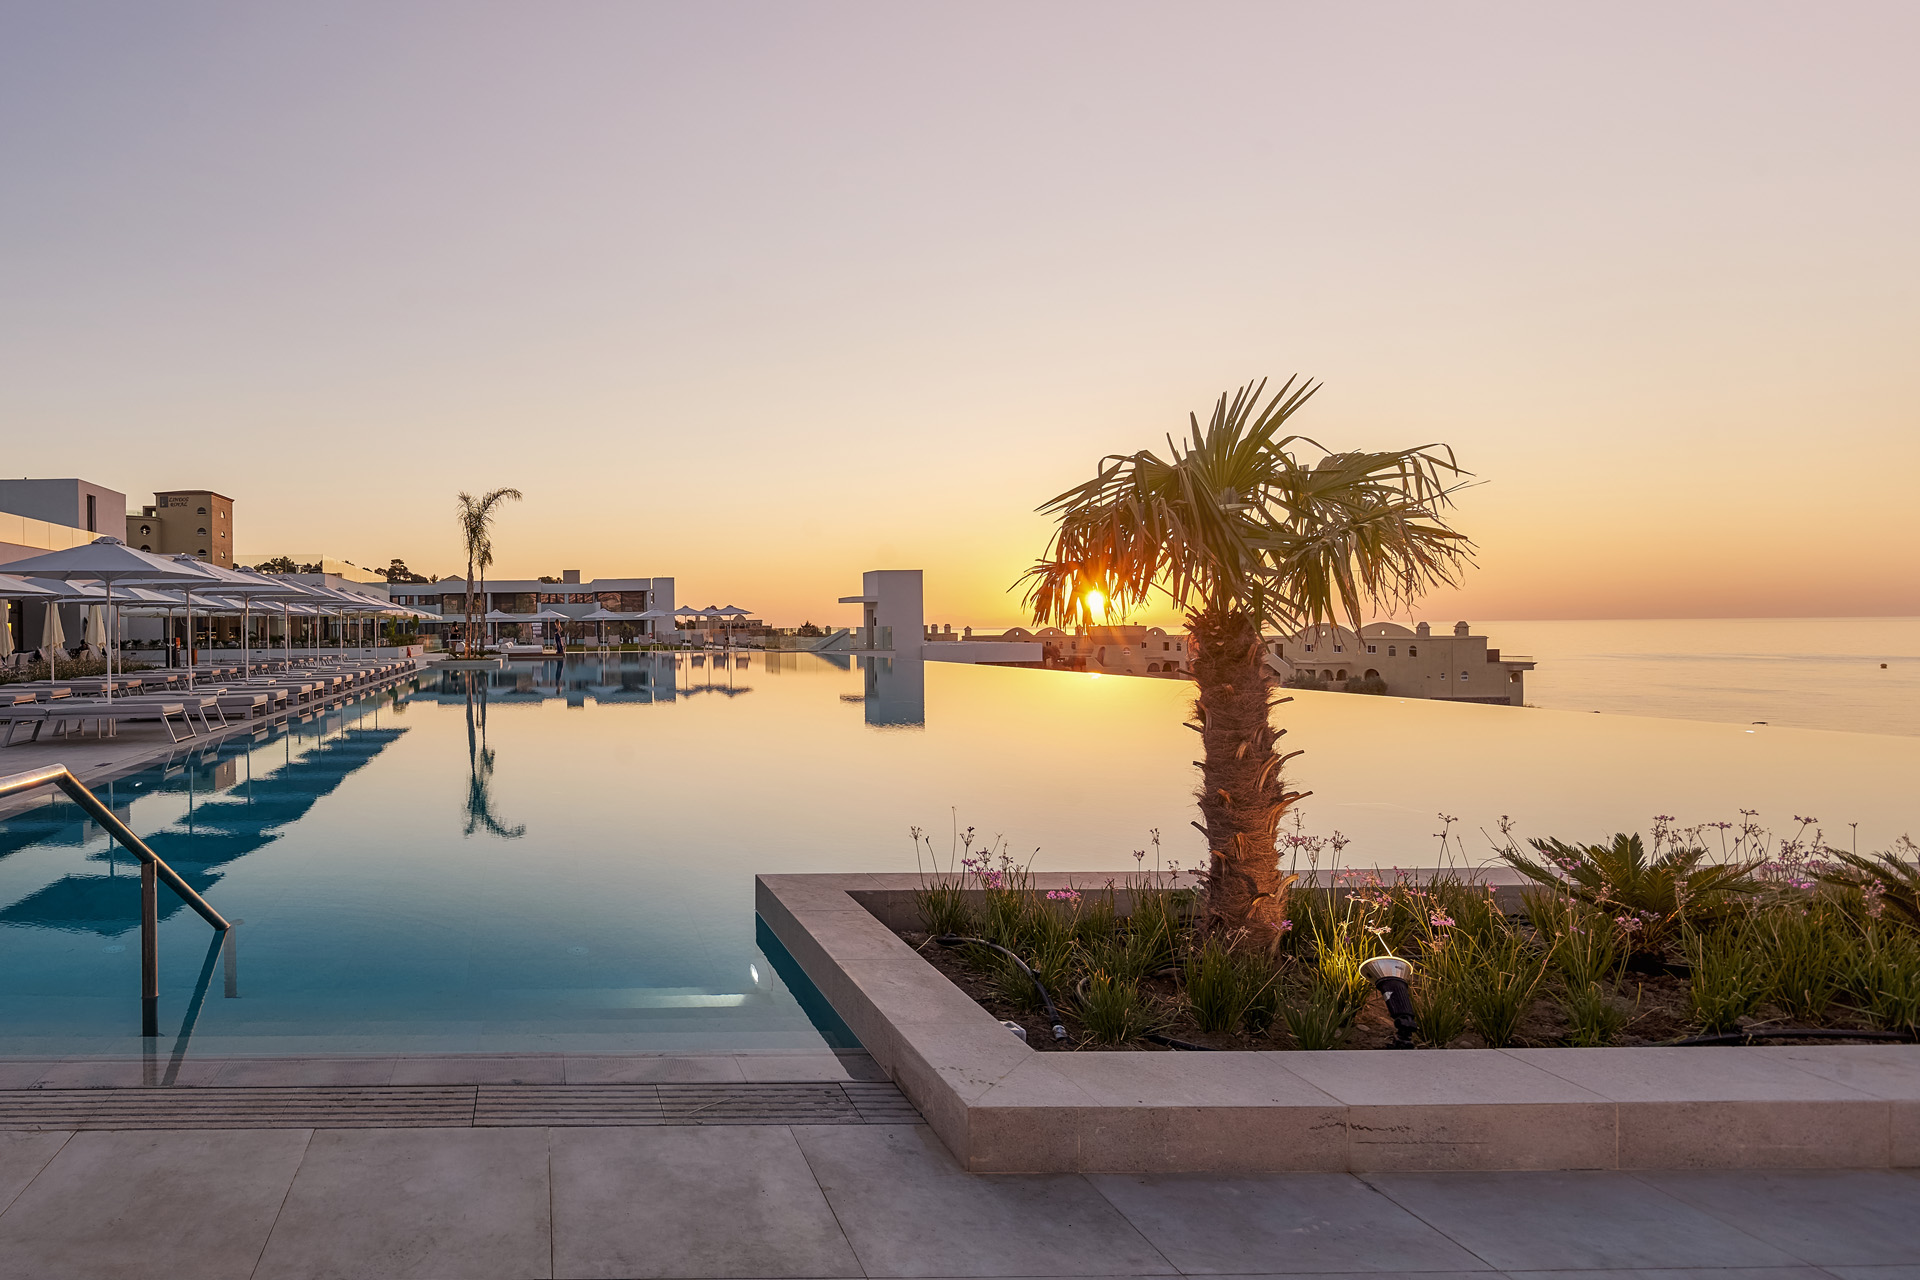 An infinity pool overlooking the sea at dusk